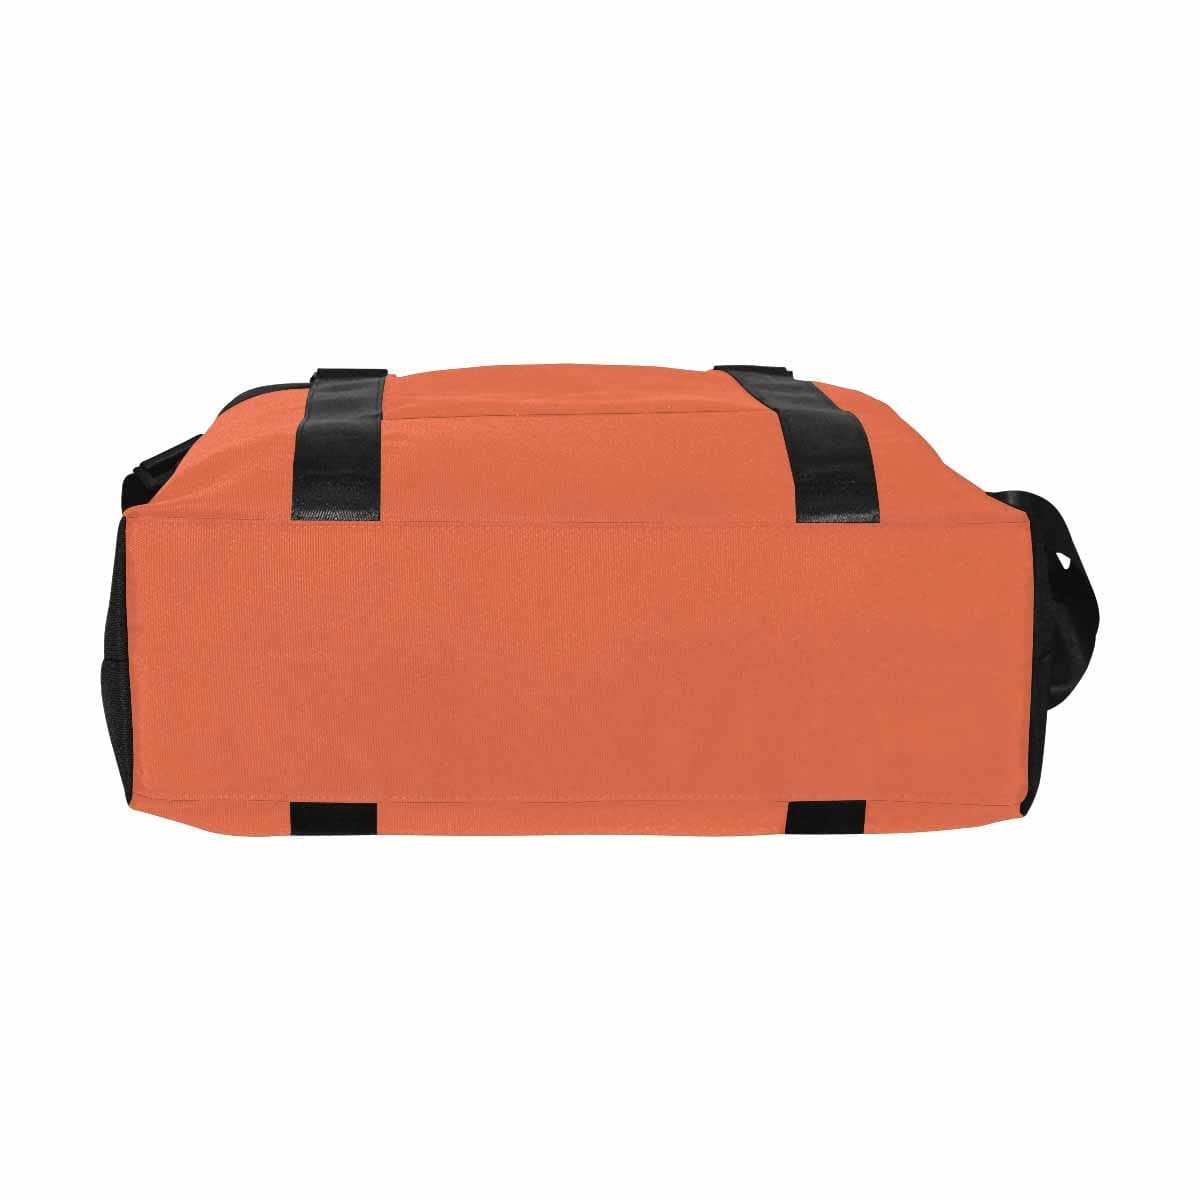 Burnt Sienna Red Duffel Bag Large Travel Carry On - Bags | Duffel Bags